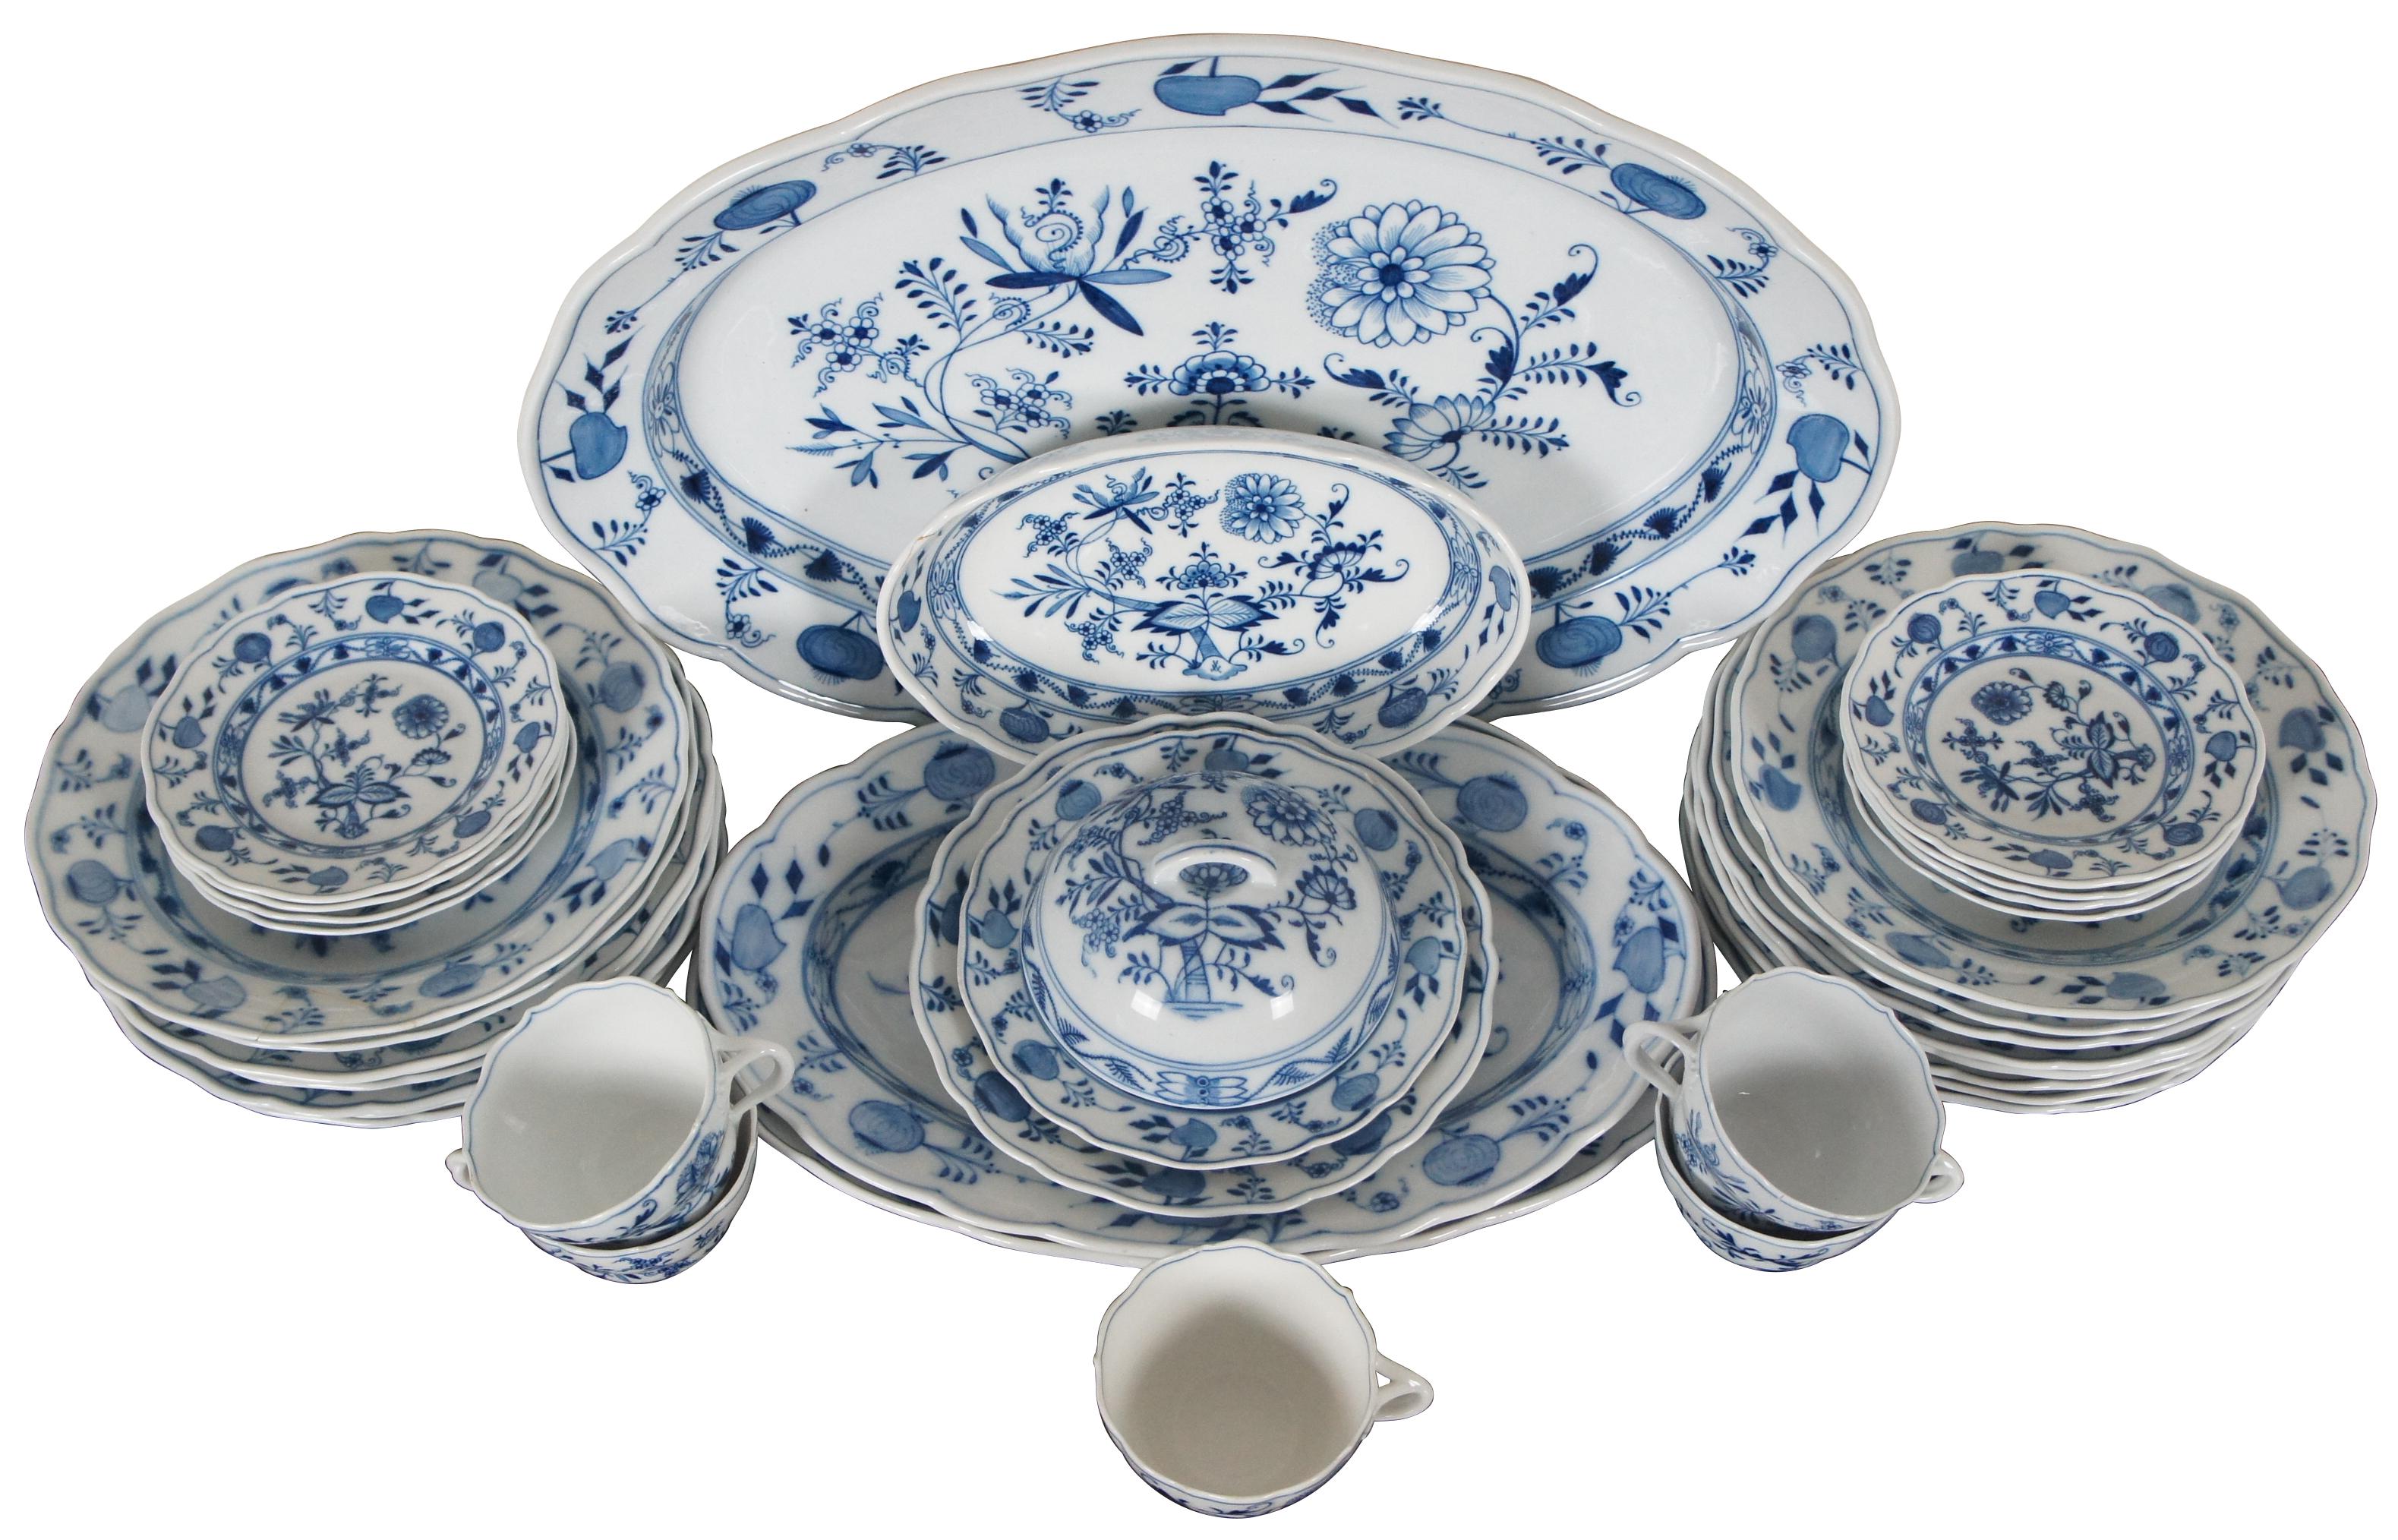 Antique 36 piece set of Meissen flow blue porcelain dinnerware in the Blue Onion pattern with the crossed swords makers mark.

Large Oval Platter - 20.25” x 15.25” x 2.5” / Medium Oval Platter - 15.75” x 11.125” x 2” / Medium Oval Platter - 15.25”